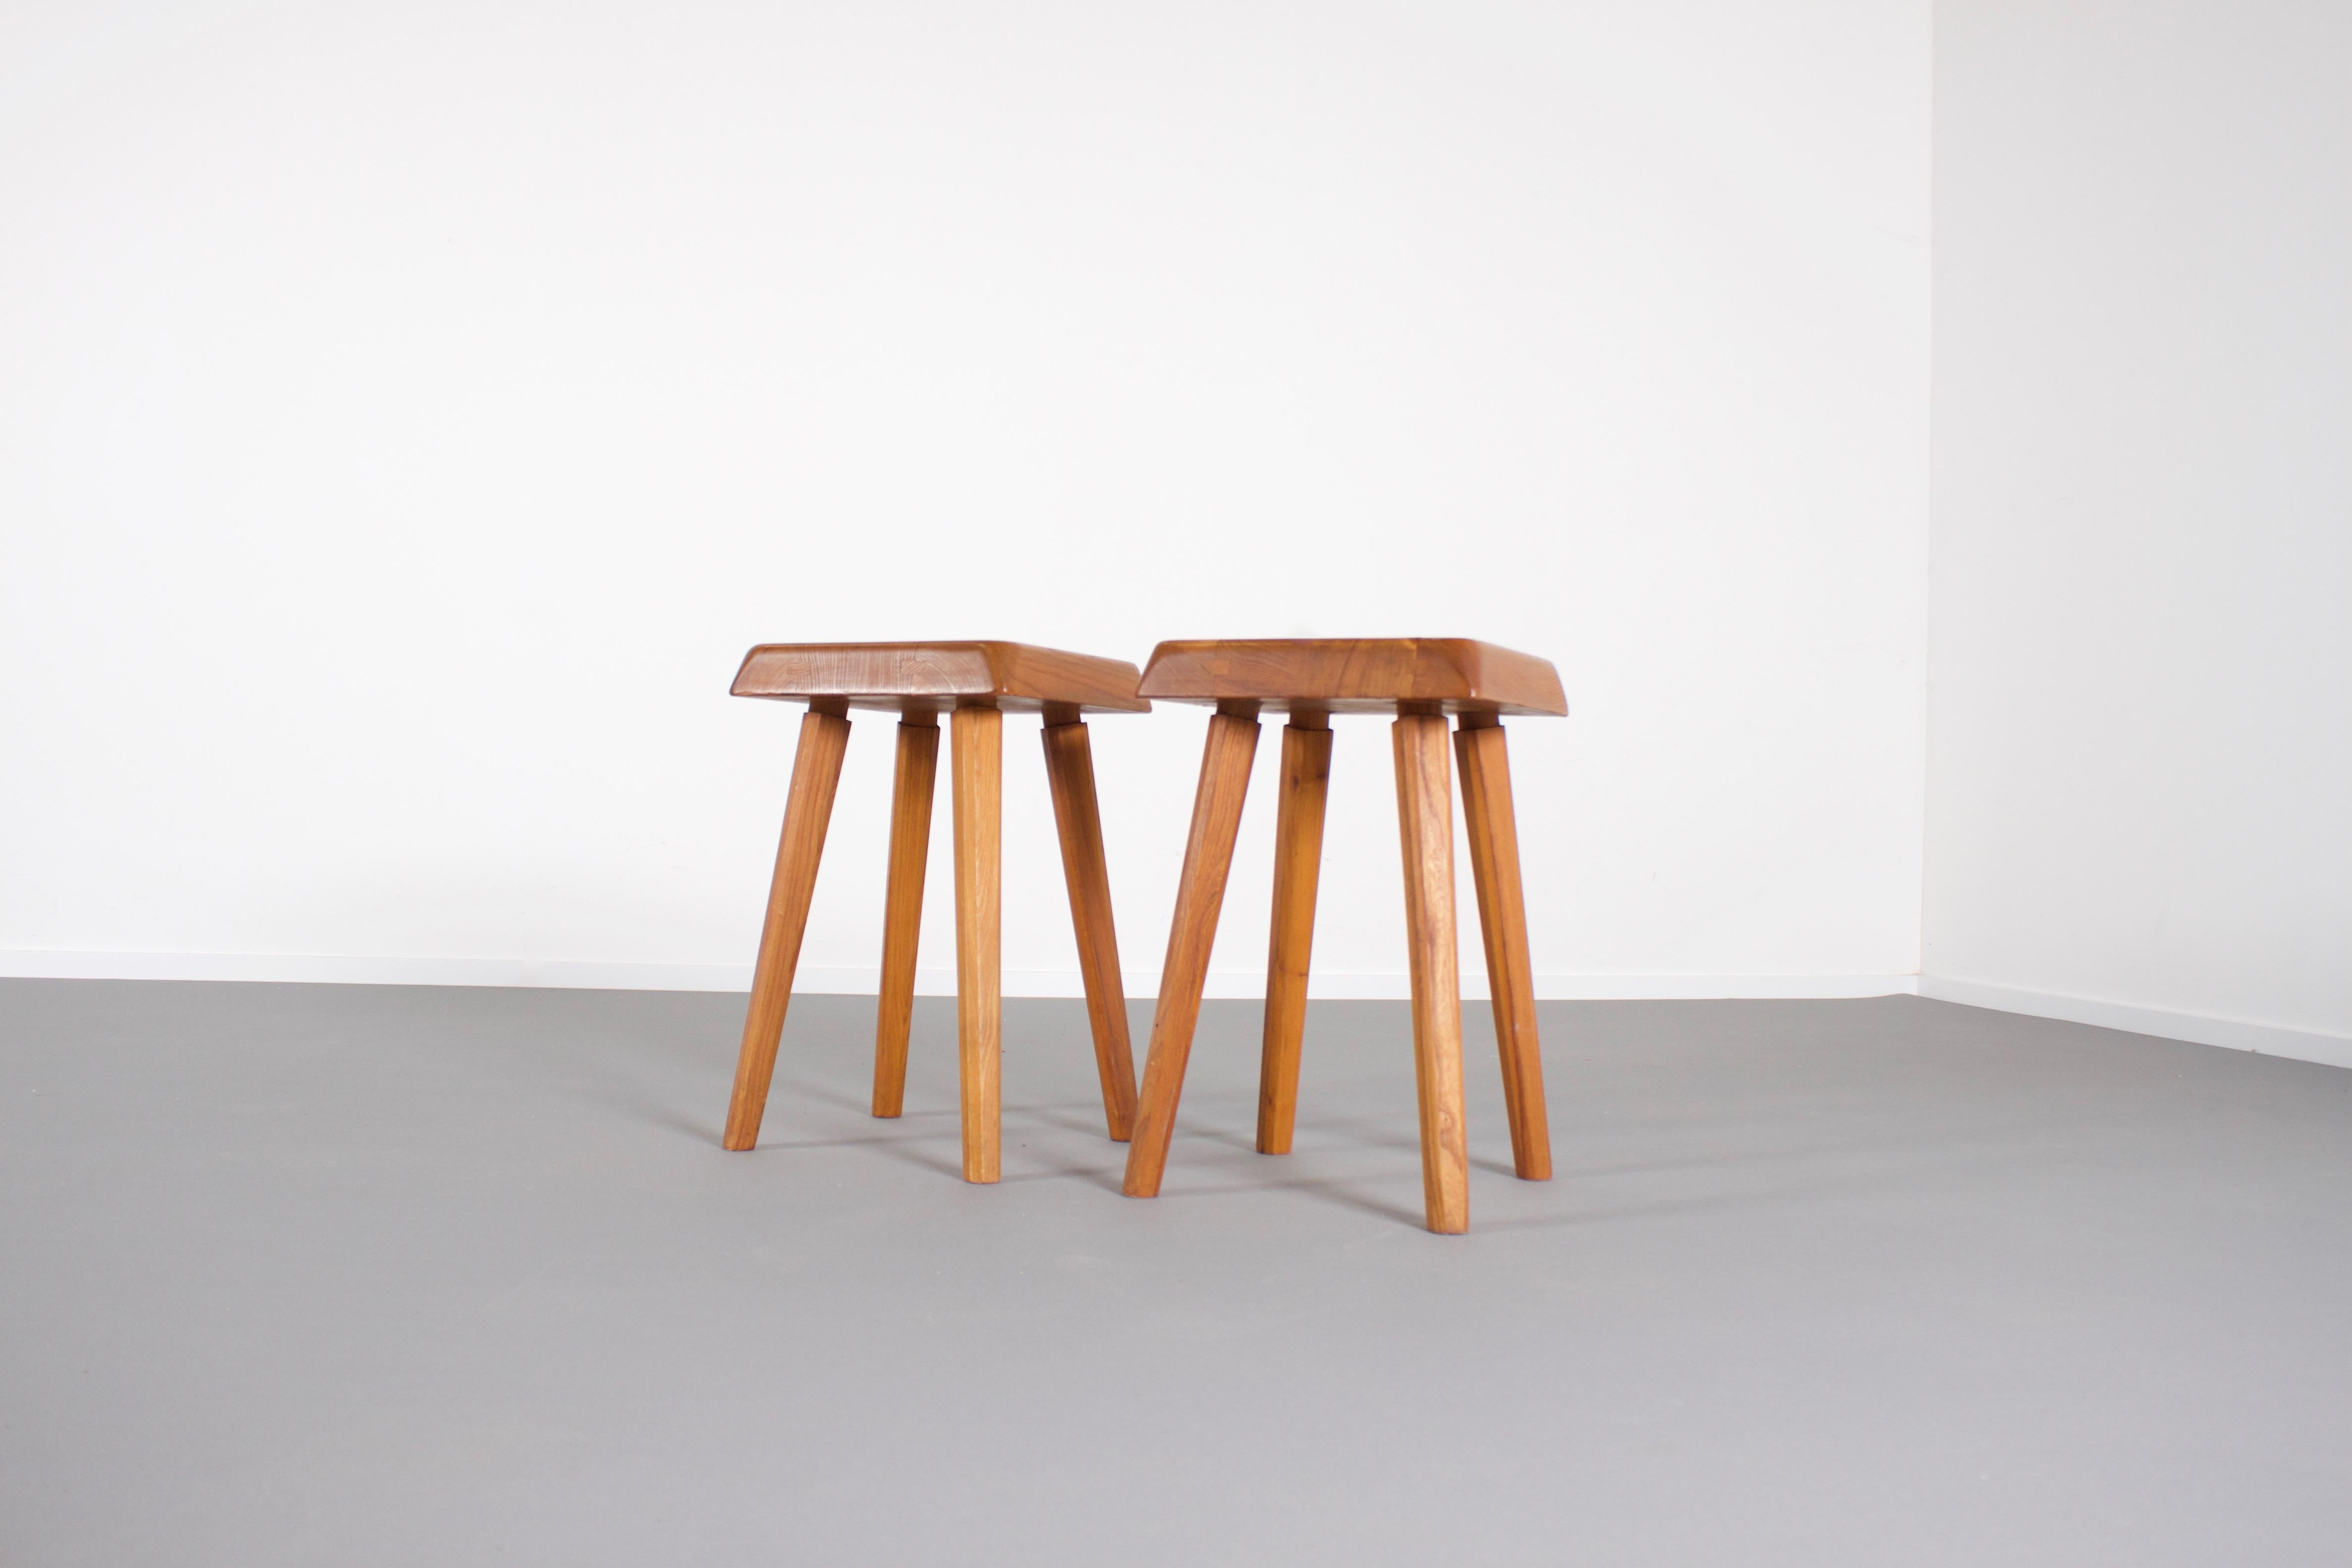 Two beautiful vintage S01 stools in very good condition.

Designed and manufactured by Pierre Chapo in the 1960s 

These stools are made of solid elmwood. The design is simplistic and therefore the grain and natural character of the wood is nicely